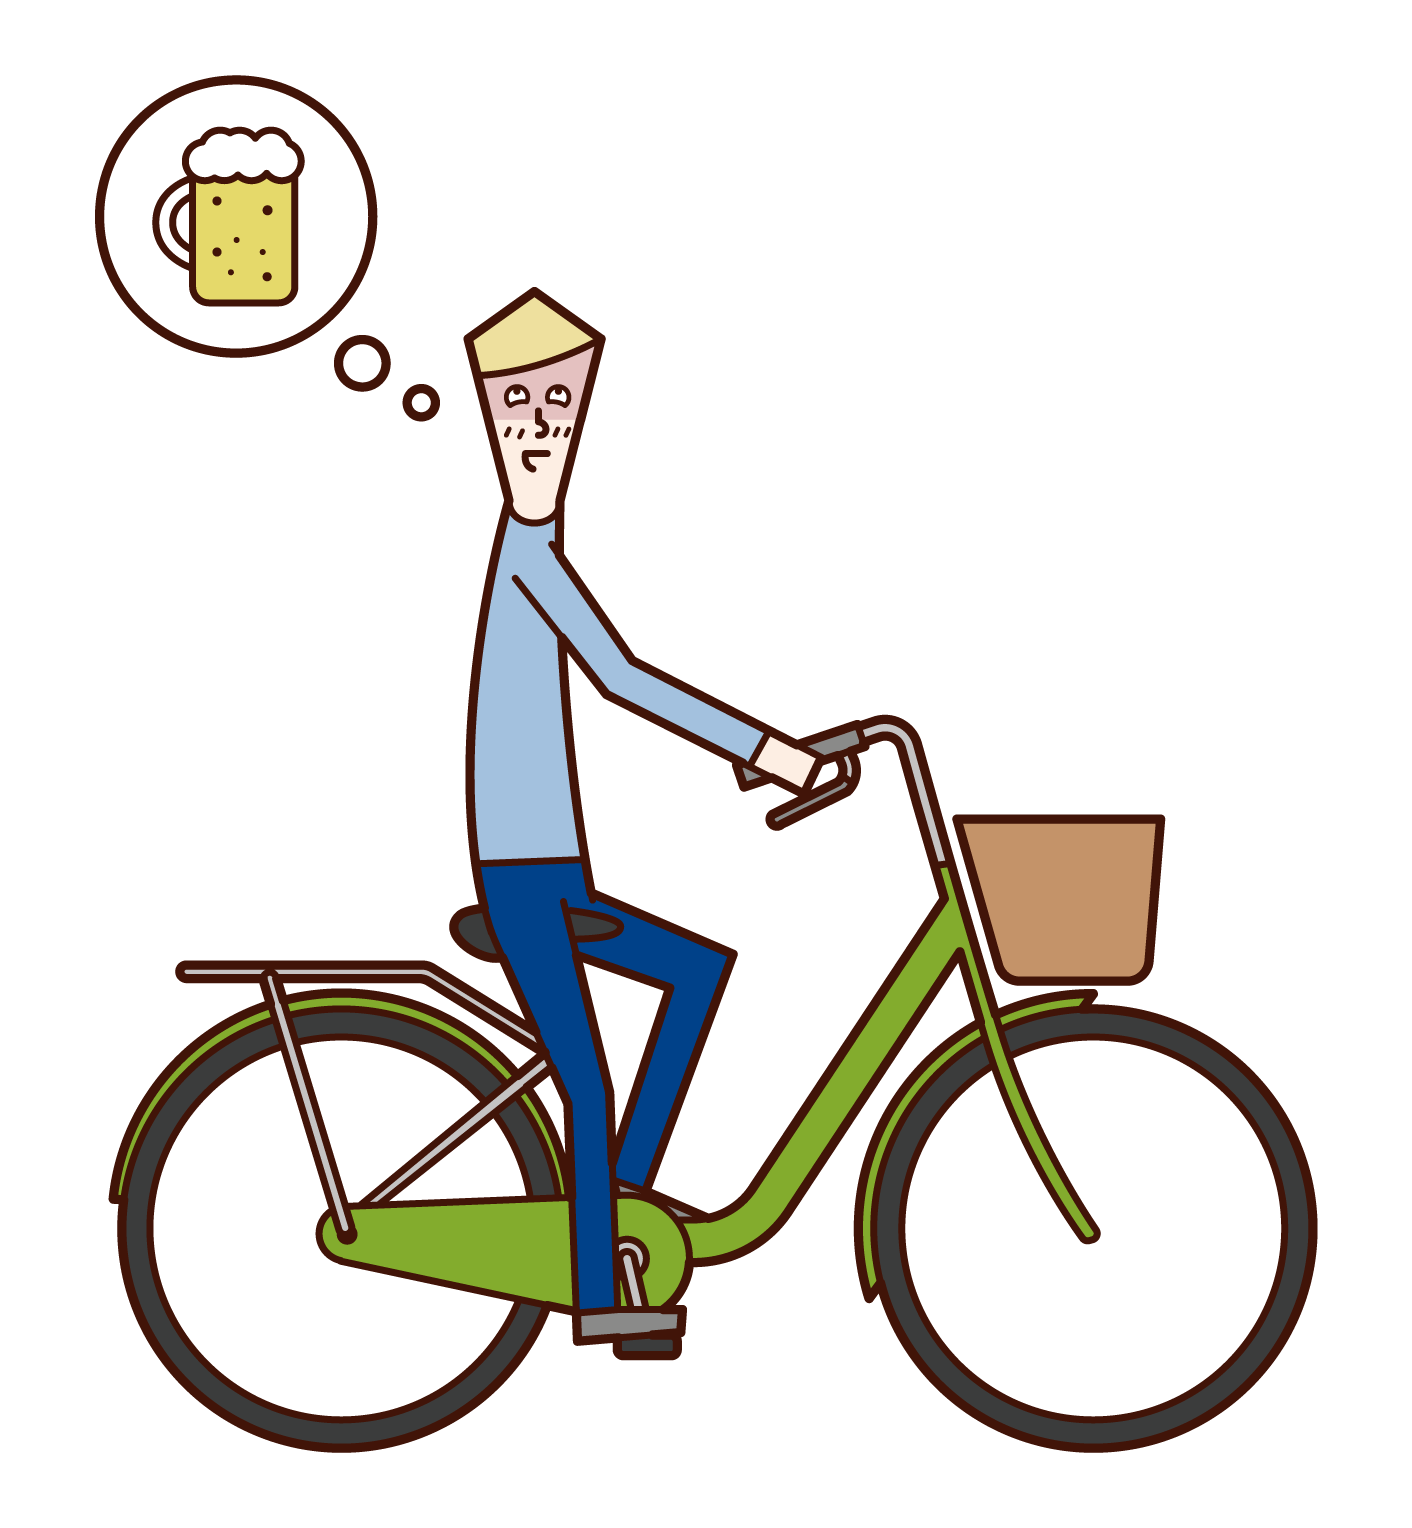 Illustration of a man driving drunk on a bicycle